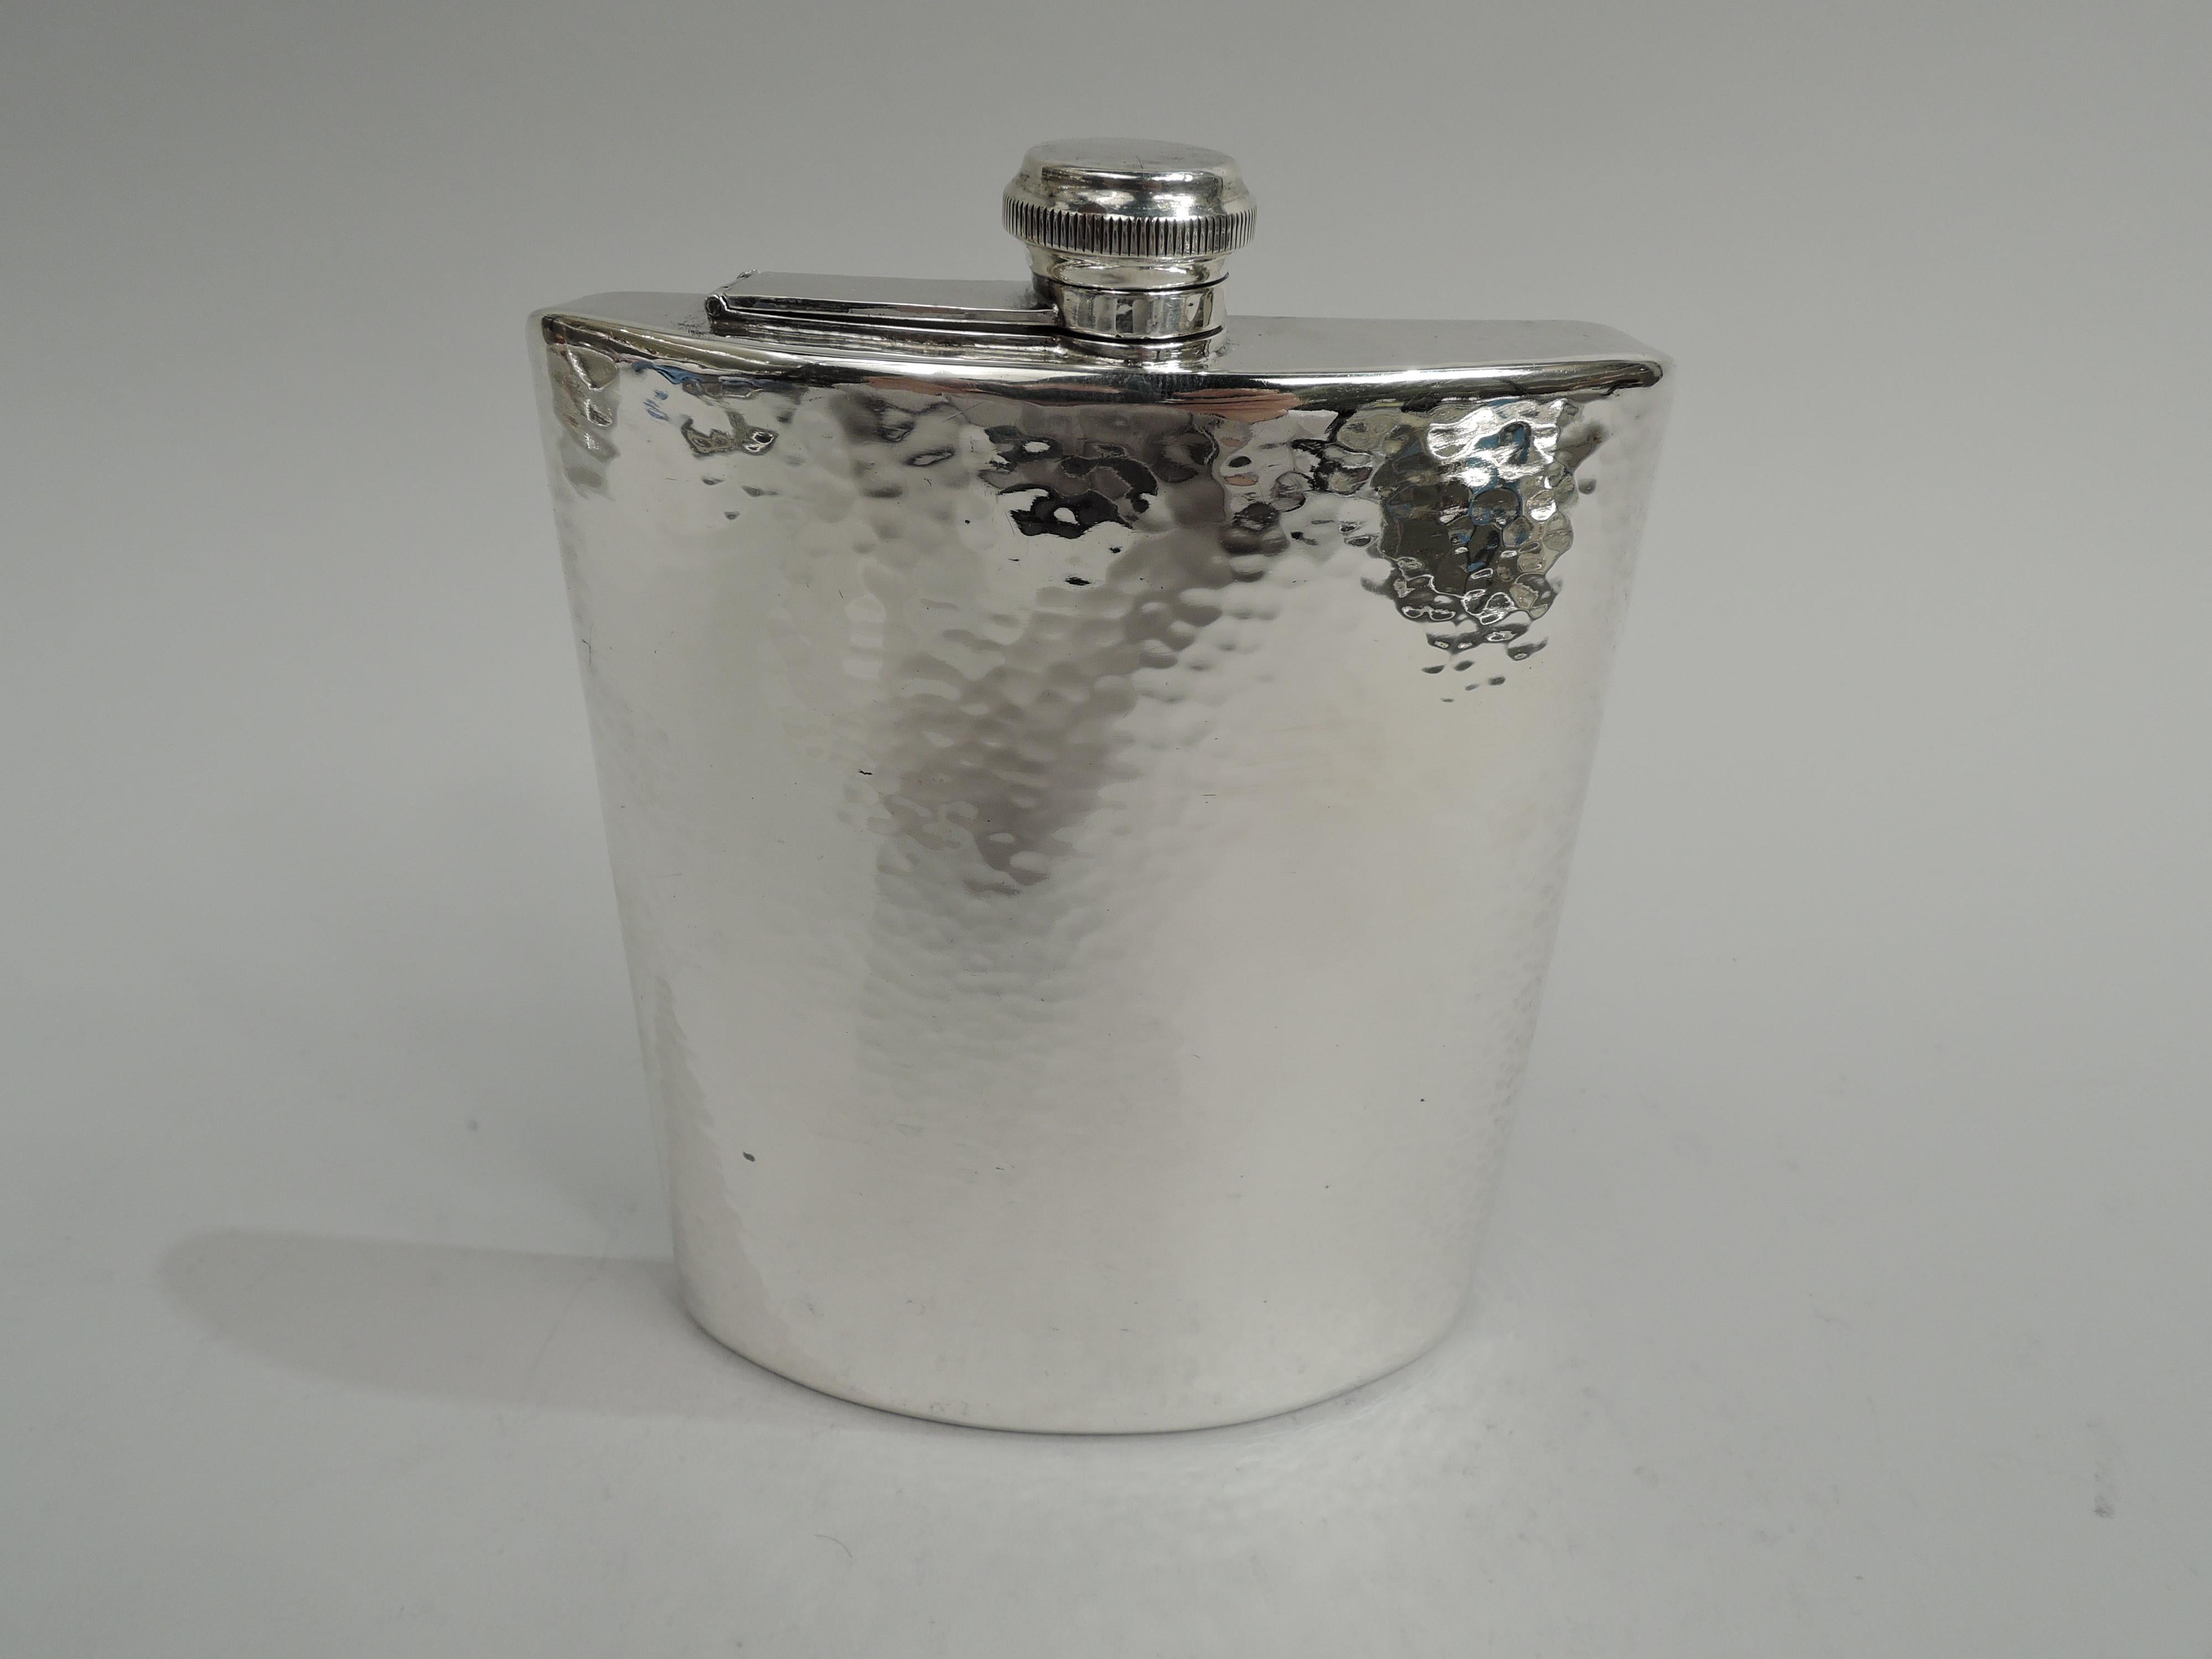 Craftsman sterling silver flask. Made by Lebolt & Co. in Chicago, ca 1920. Curved with flat top and bottom; hinged and cork-lined cover. Allover hand-hammering. Holds 3/4 pint of homemade brew. Wide working-man’s handspan required. Fully marked